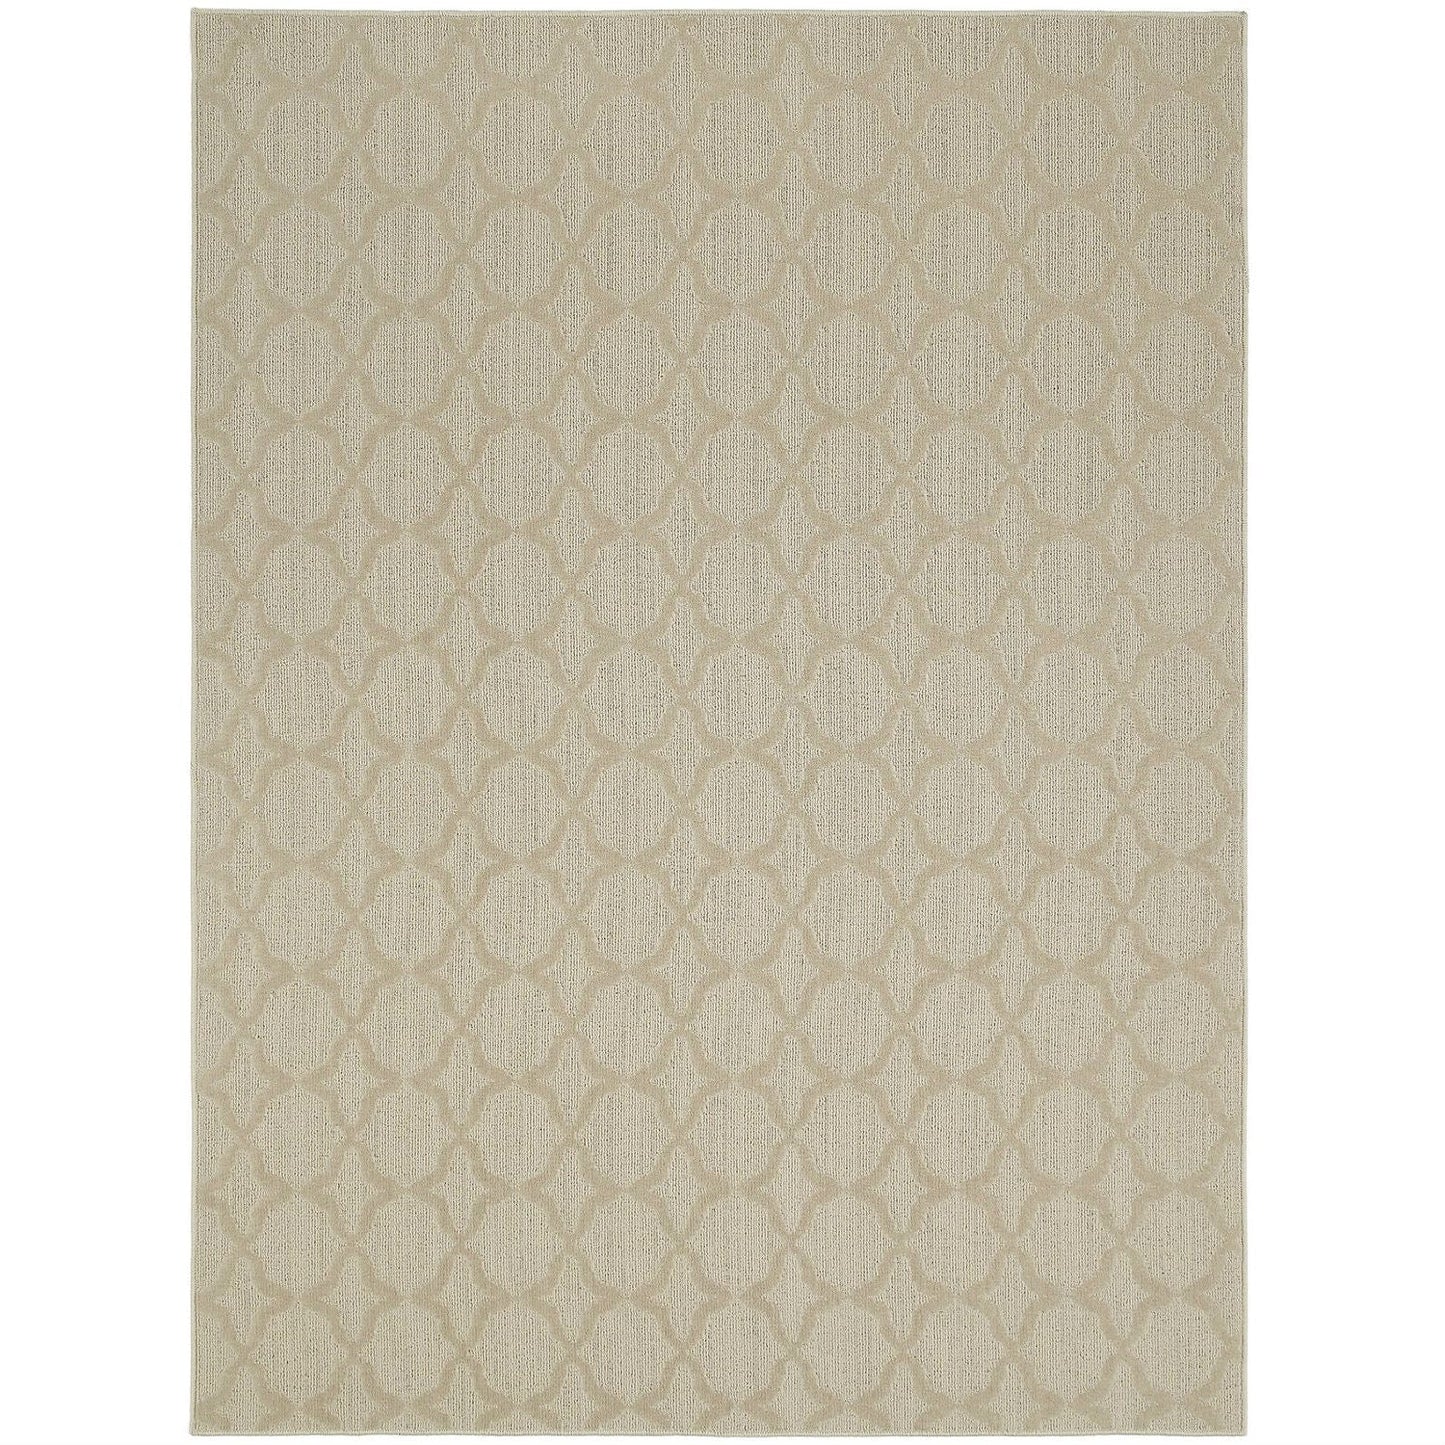 Accents > Rugs - 7.5-ft X 9.5-ft Tan Area Rug - Made In USA